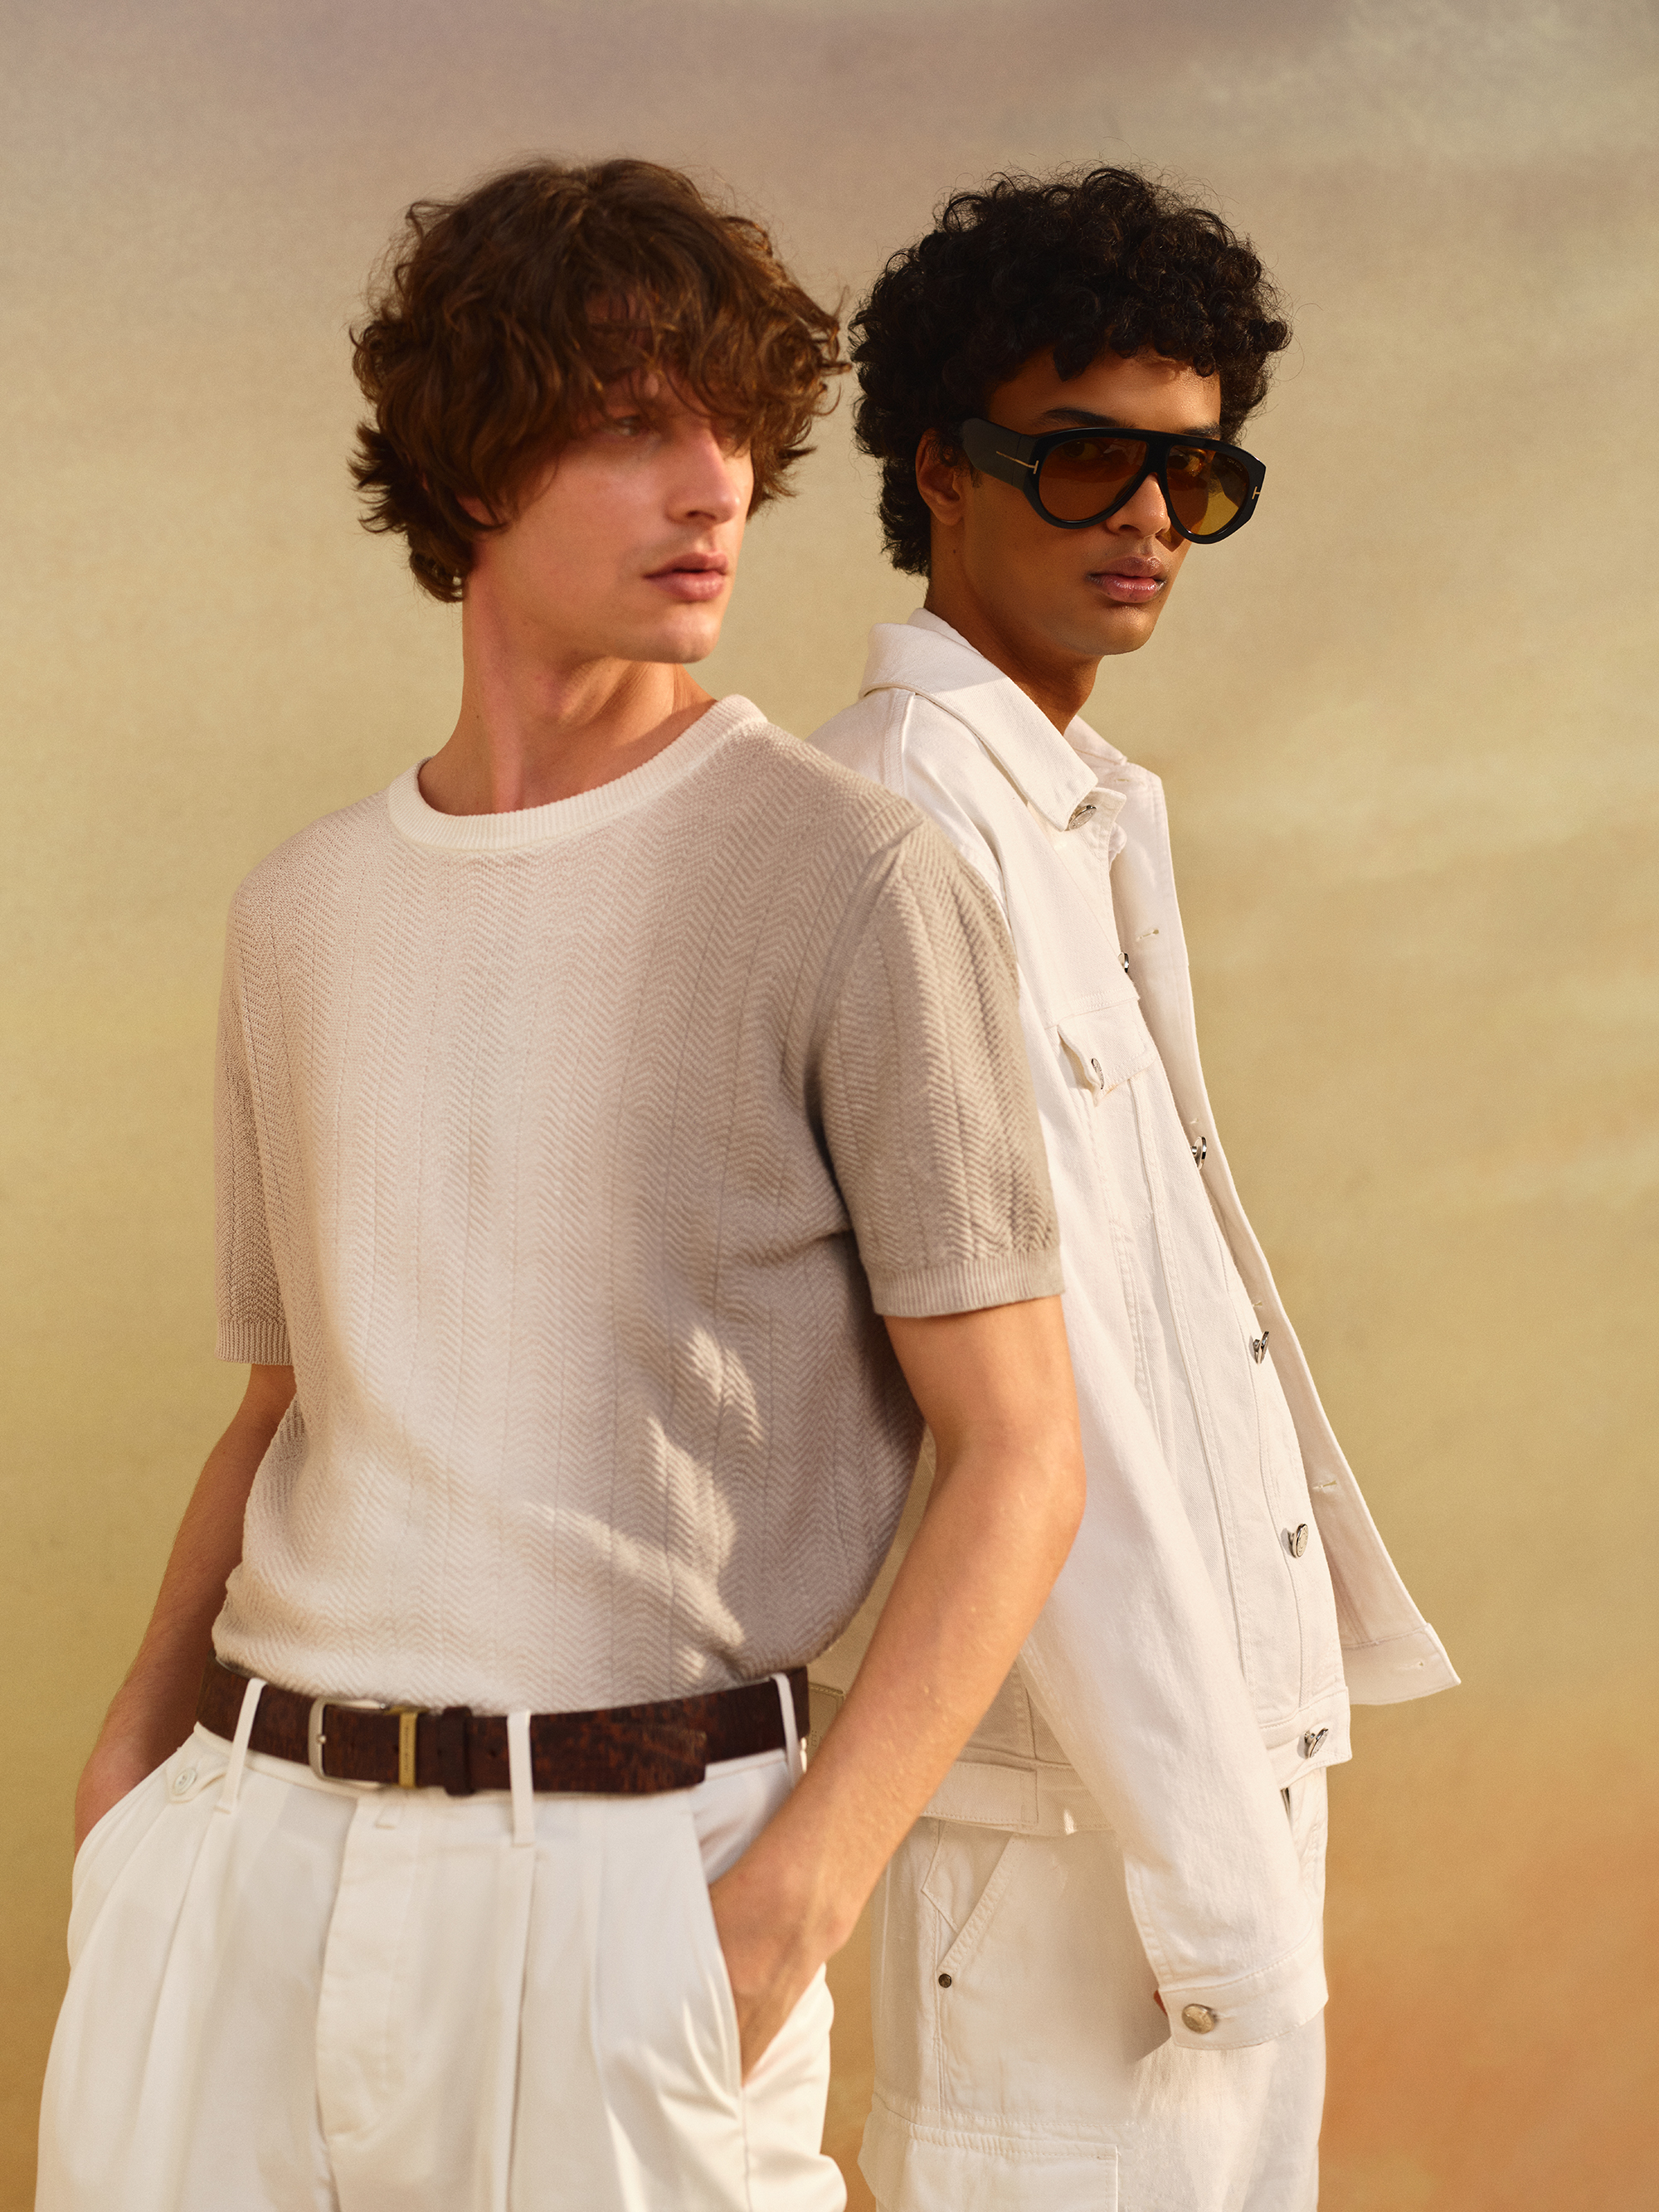 Two models pose together in all-white Jacob Cohën looks